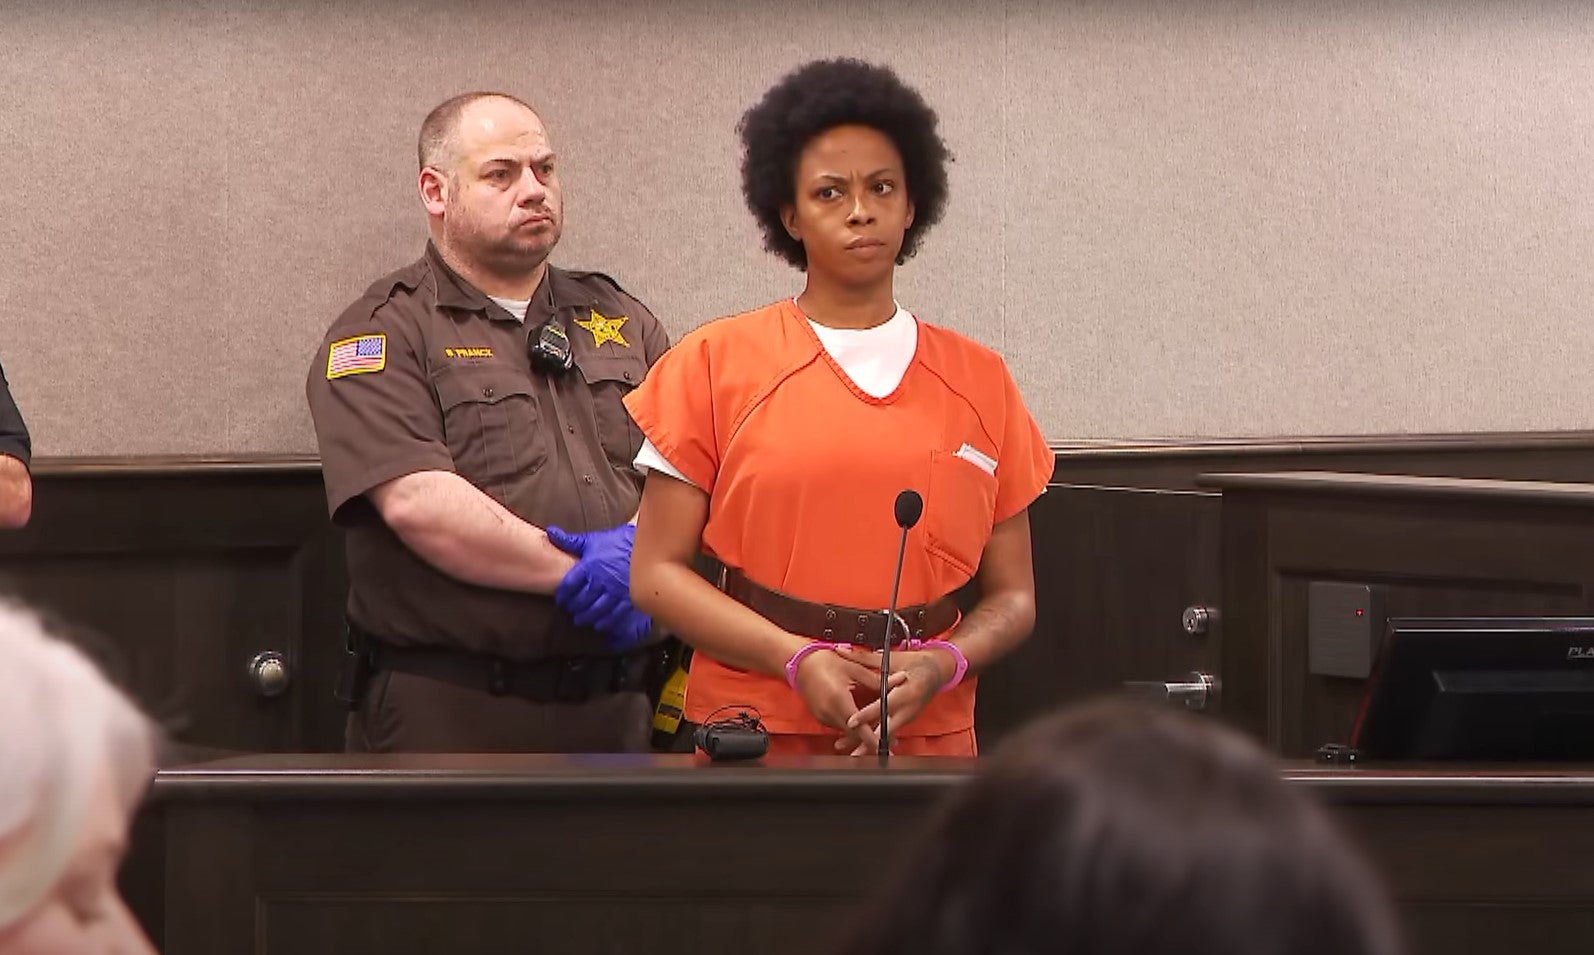 Dejaune Anderson appeared in court accused of murdering her son and dumping his body in a suitcase in 2022